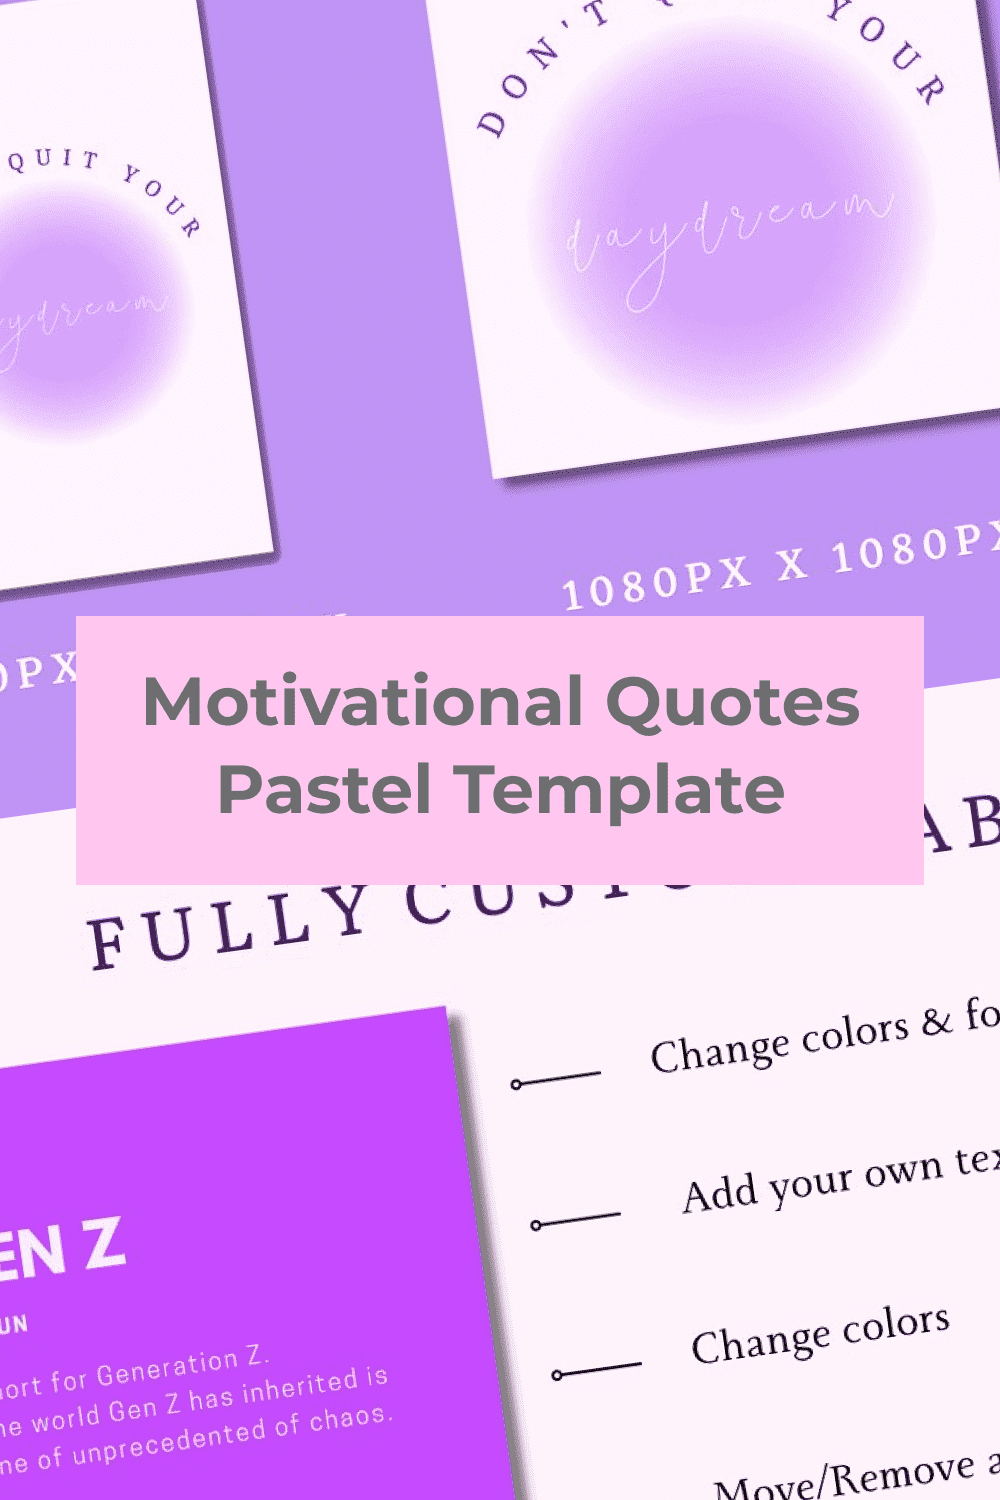 Motivational Quotes Pastel Template - Make Your Own Design.